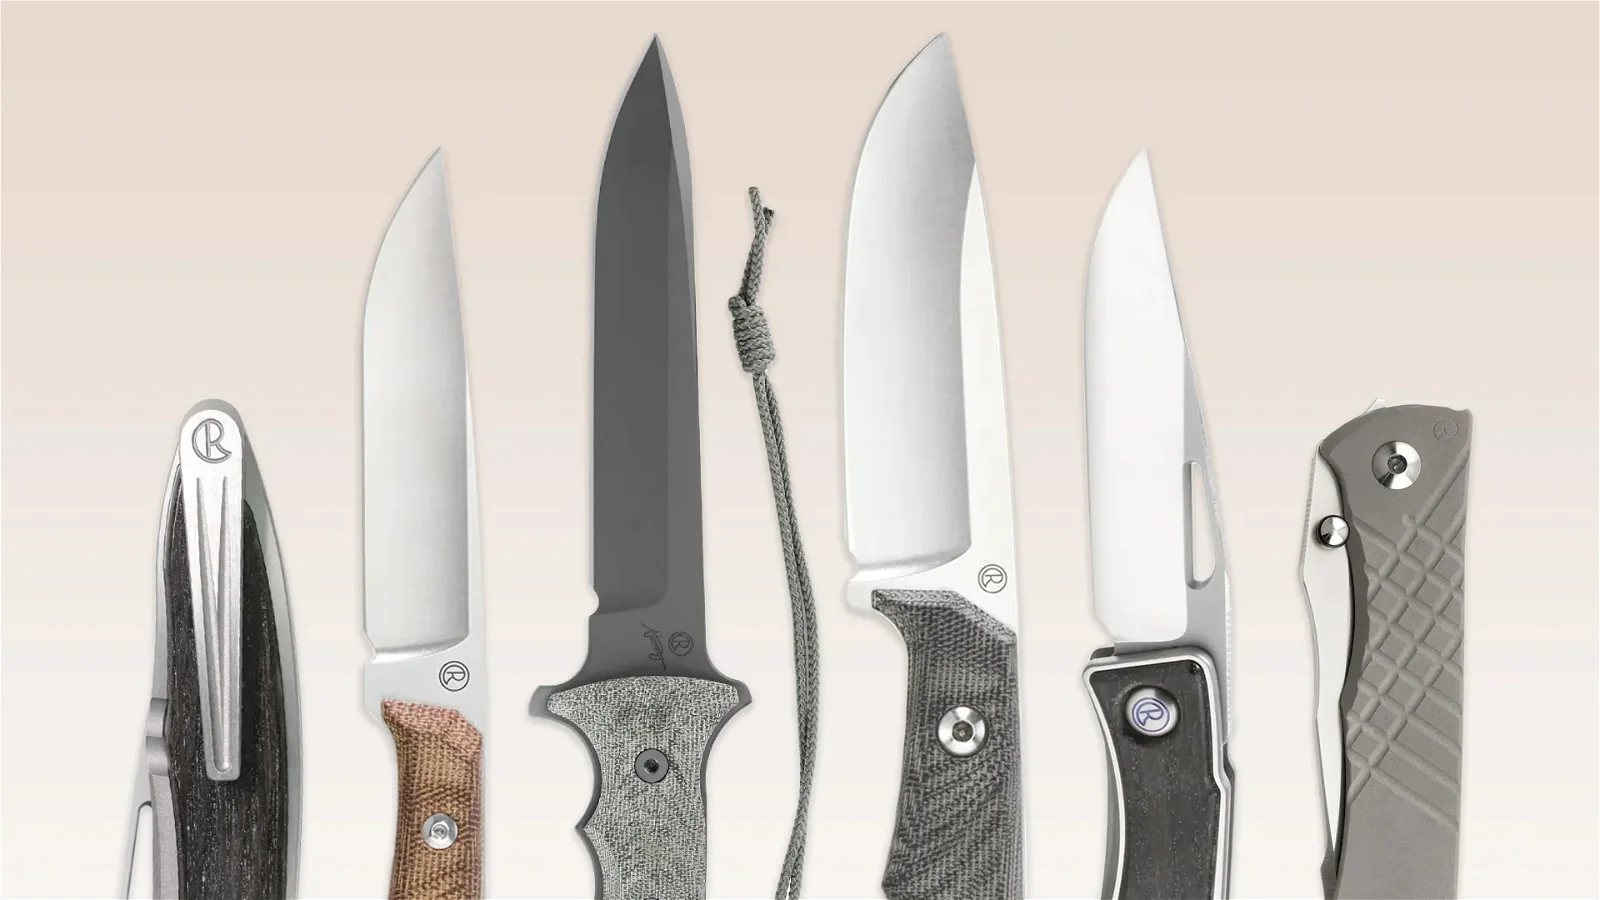 The Complete Guide to Chris Reeve Knives | Gear Patrol